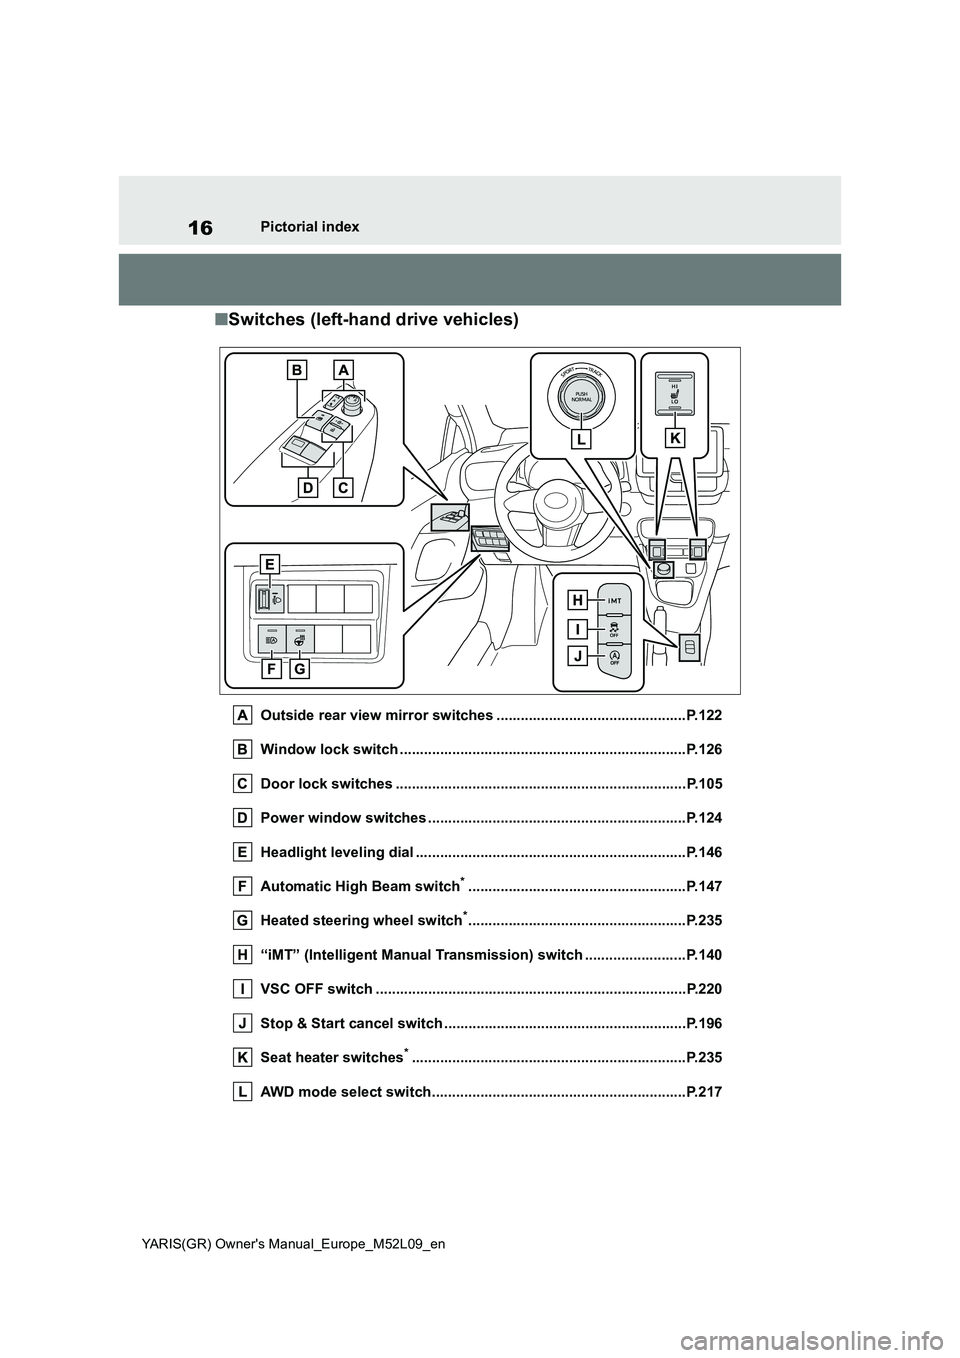 TOYOTA GR YARIS 2021  Owners Manual 16
YARIS(GR) Owners Manual_Europe_M52L09_en
Pictorial index
■Switches (left-hand drive vehicles)
Outside rear view mirror switches ...............................................P.122 
Window lock 